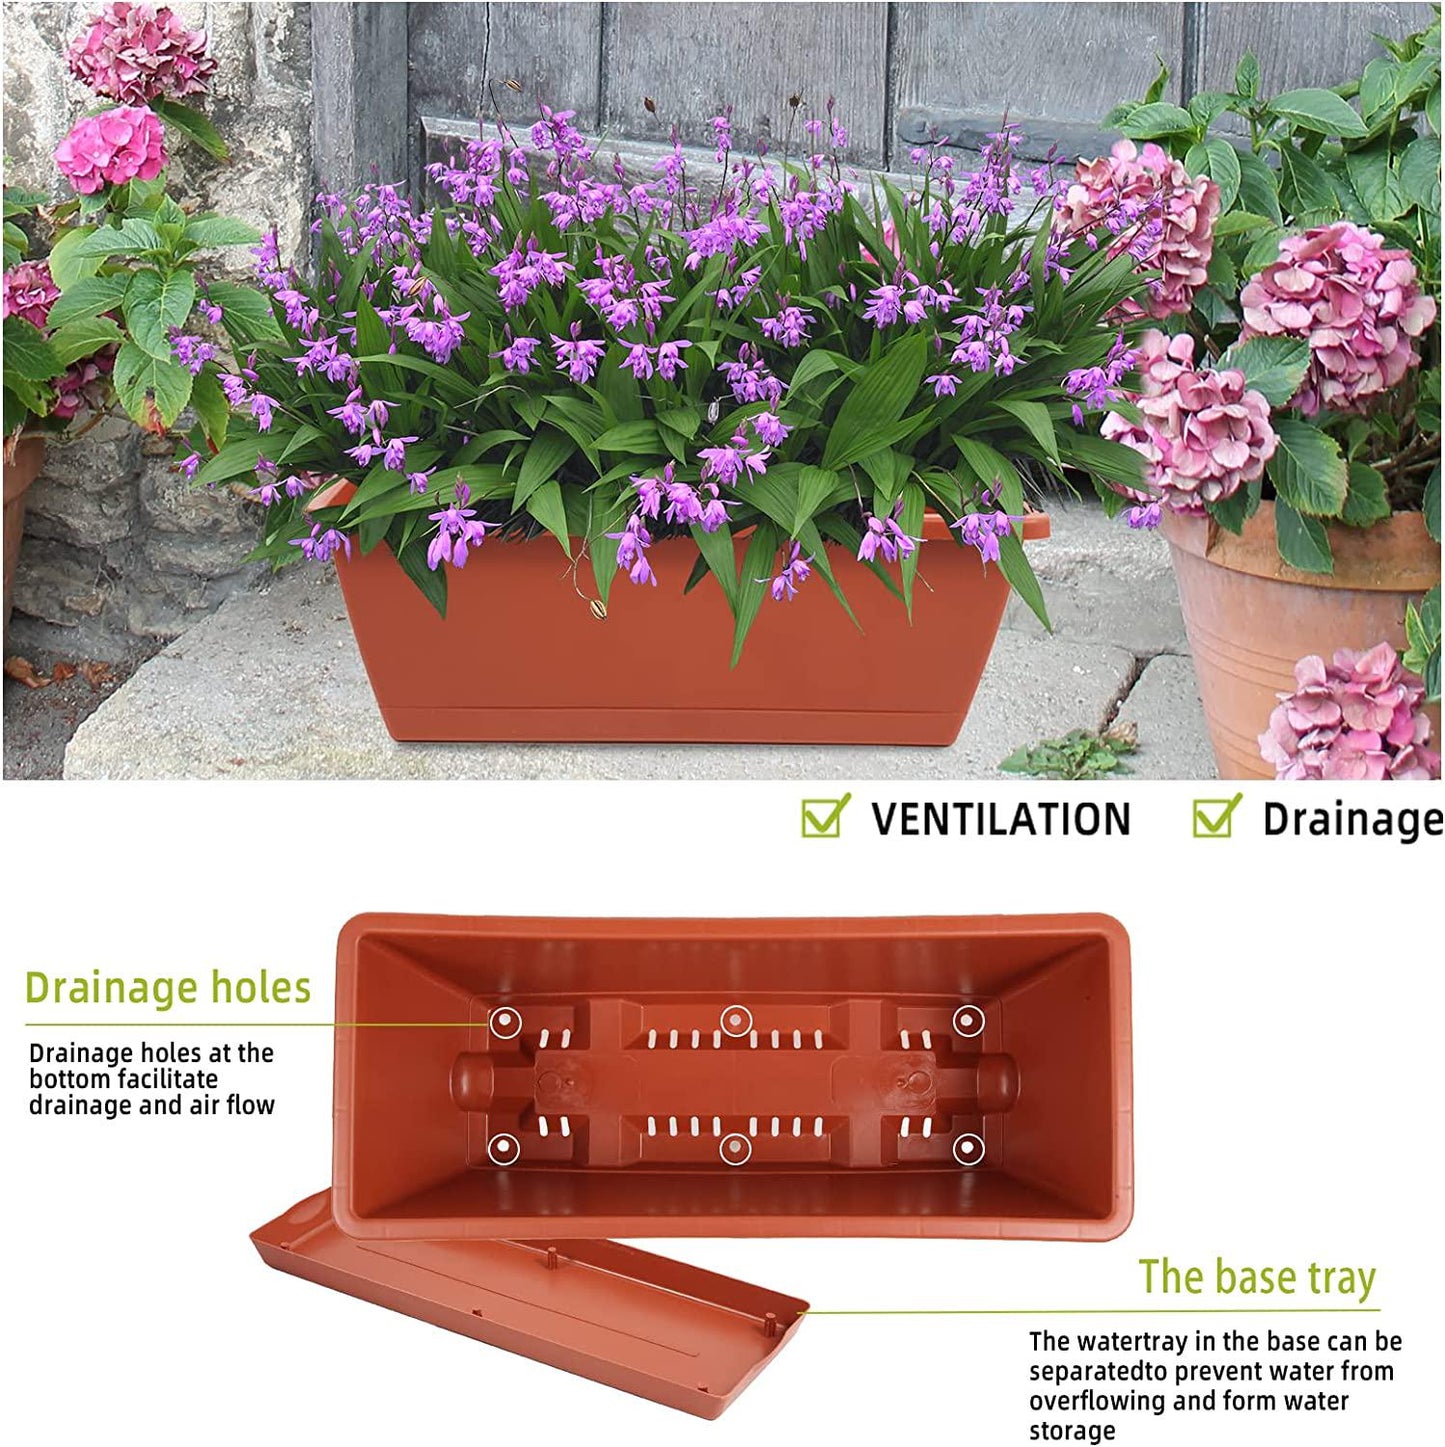 8pcs Window Box Planter,17 Inches Flower Window Boxes, Rectangle Planters Box with Drainage Holes and Trays, Plastic Vegetable Planters (Red)